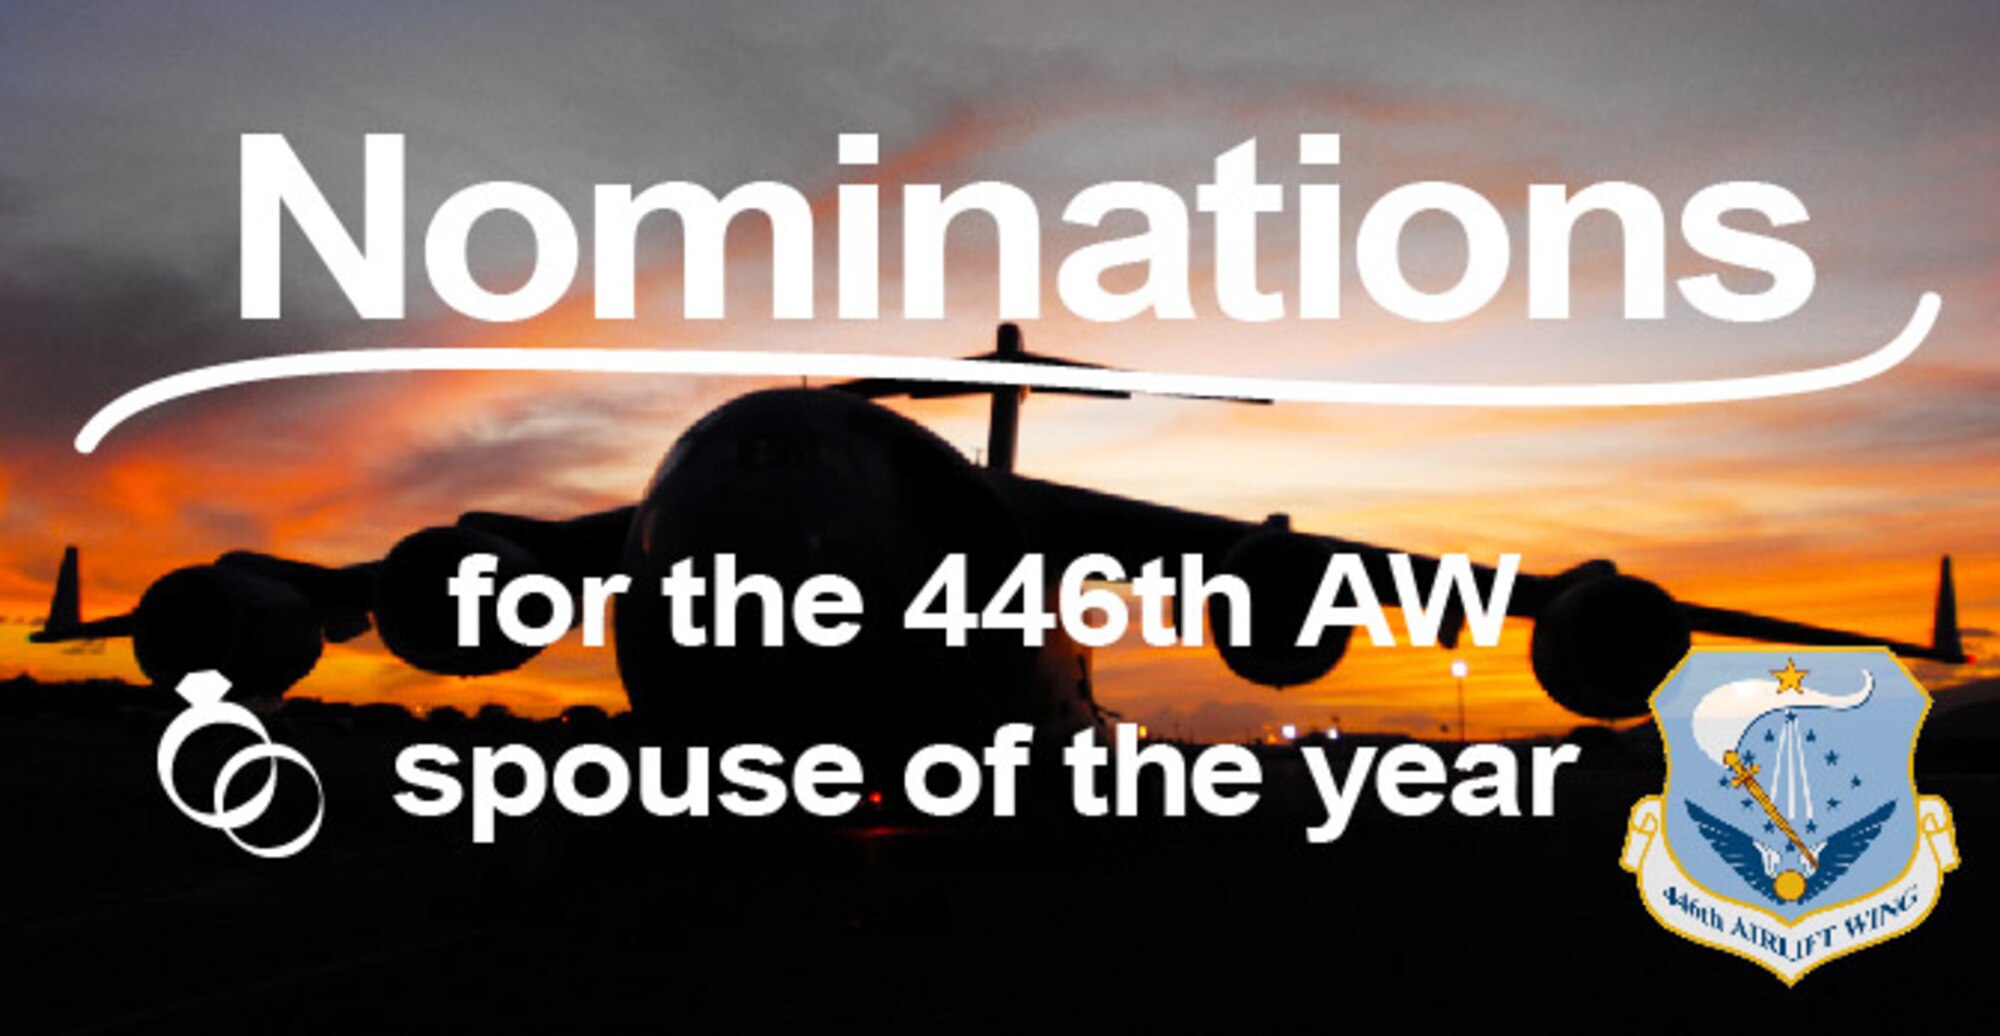 Nominations are open for the 2016 446th AW Spouse of the Year.